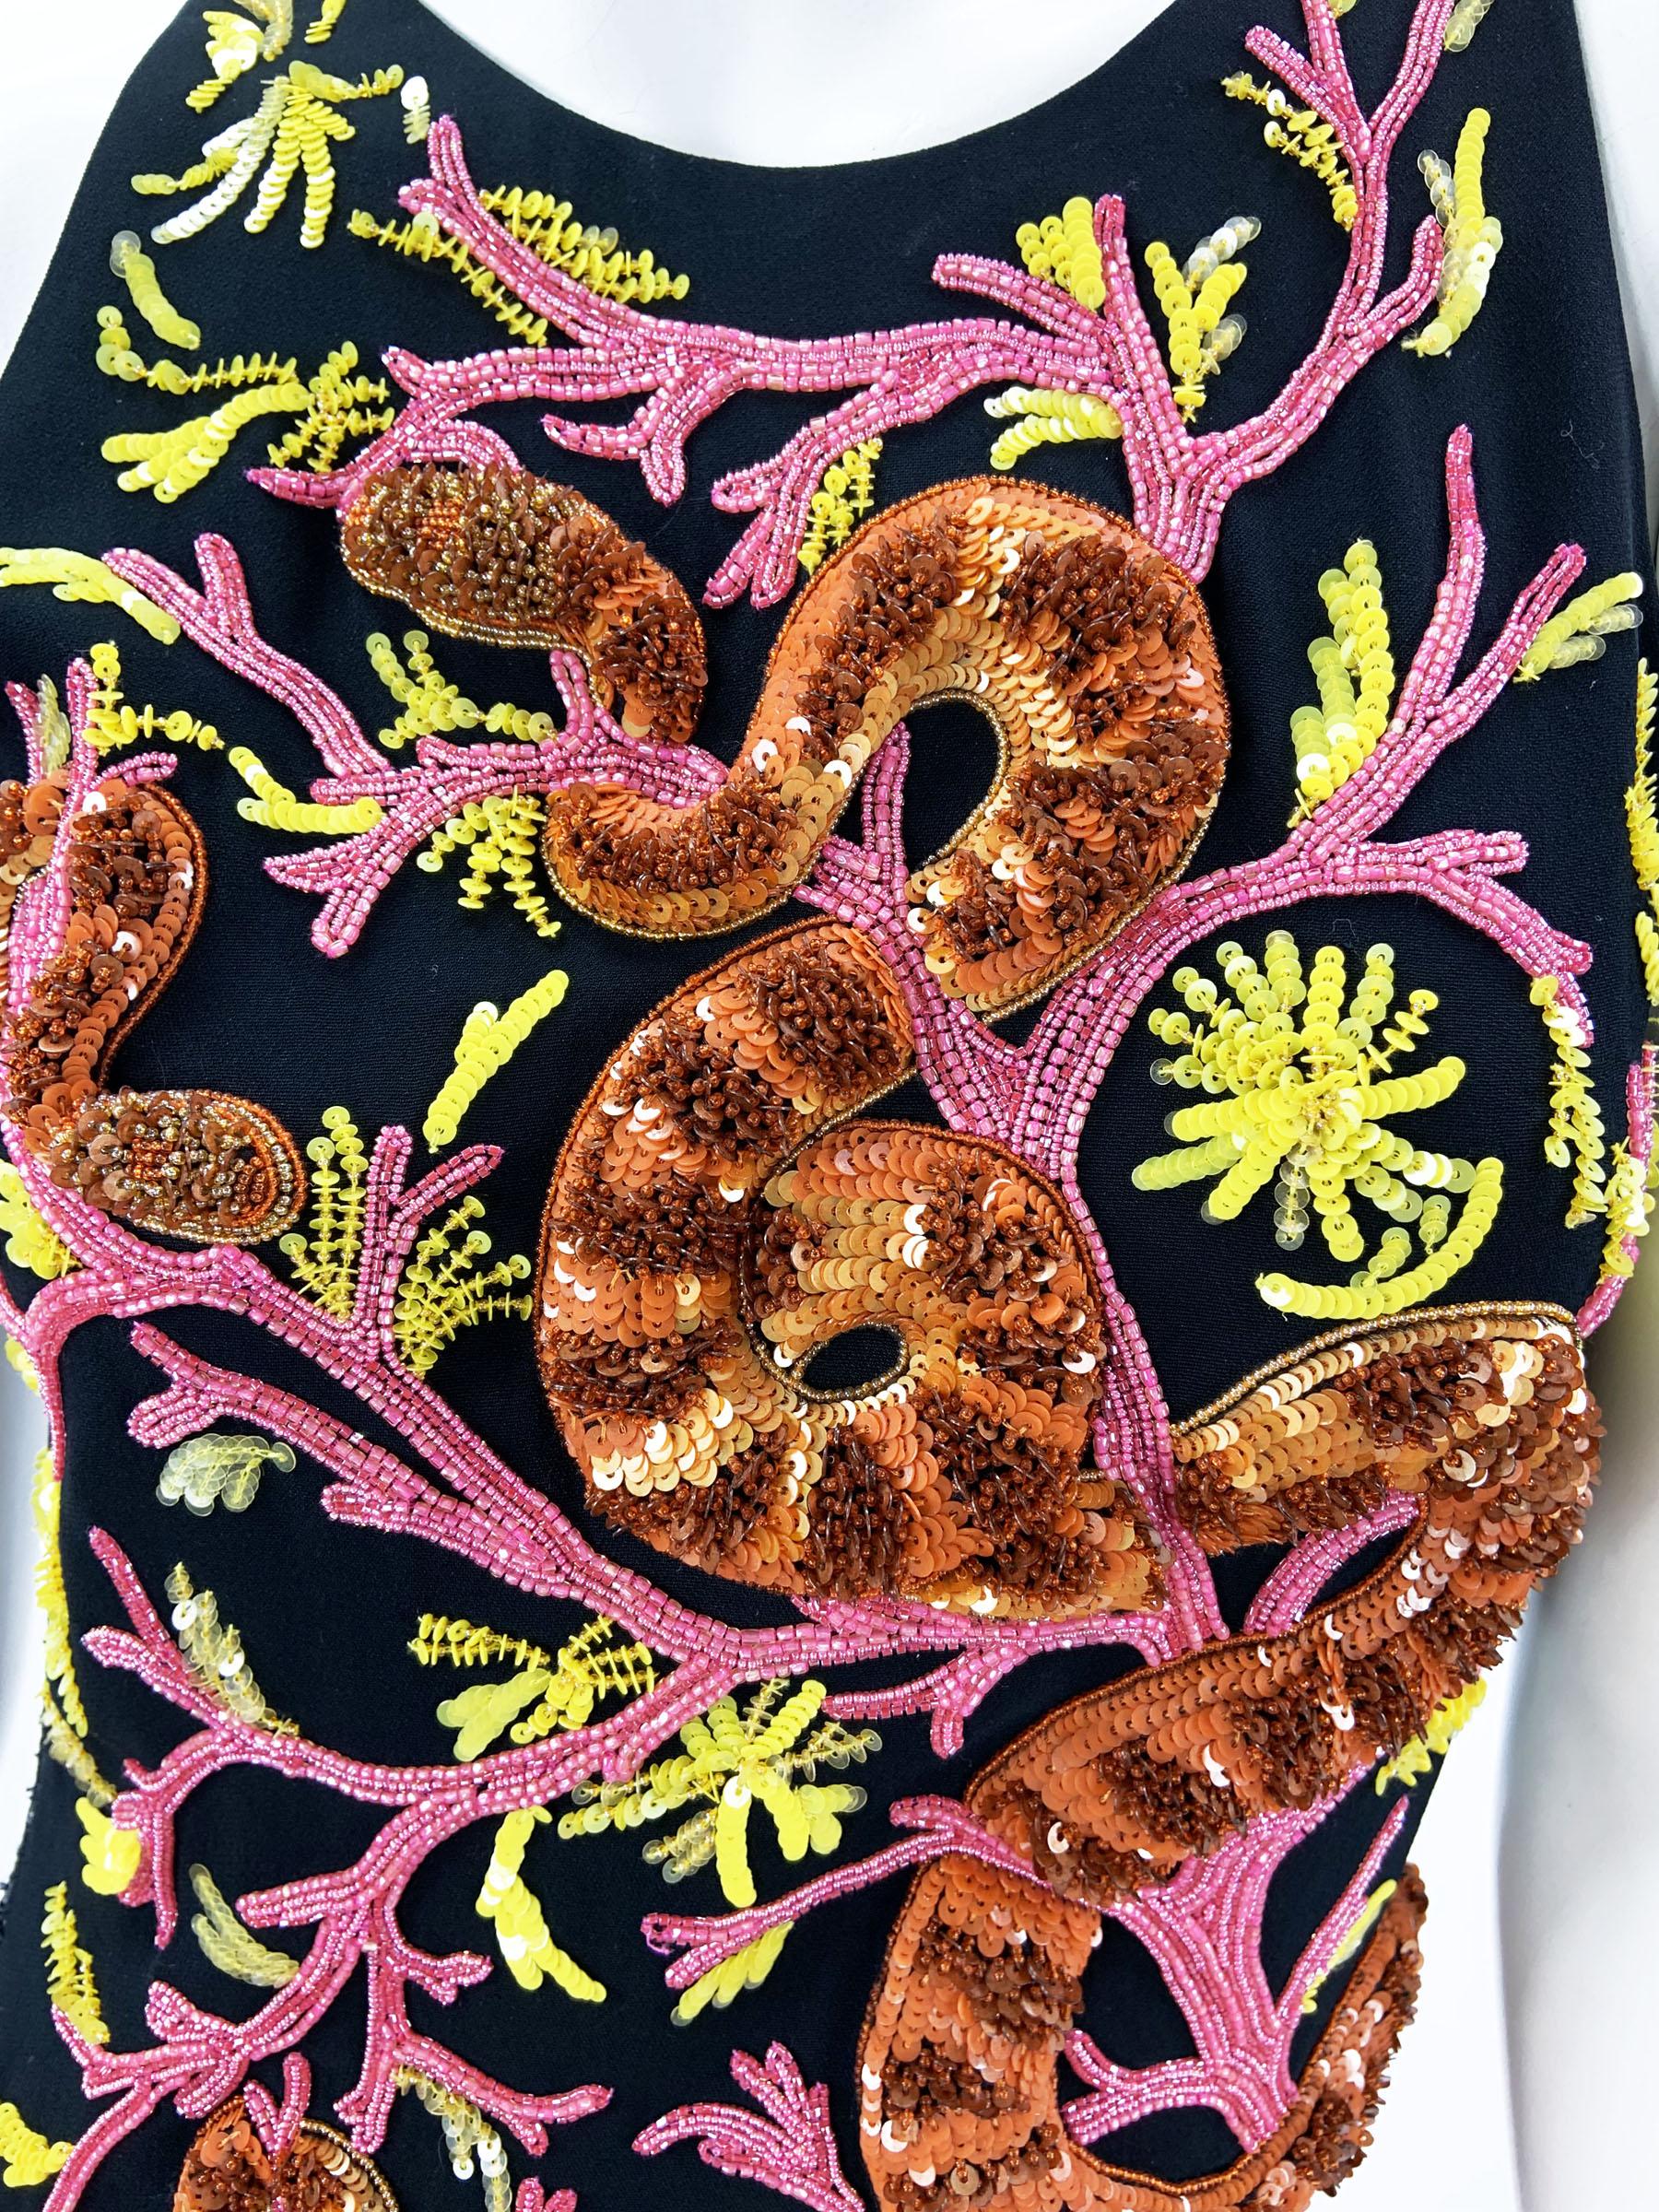 New Roberto Cavalli 3-D Snake Corals Embellished Lace Mini Dress Italian 38, 40 For Sale 5